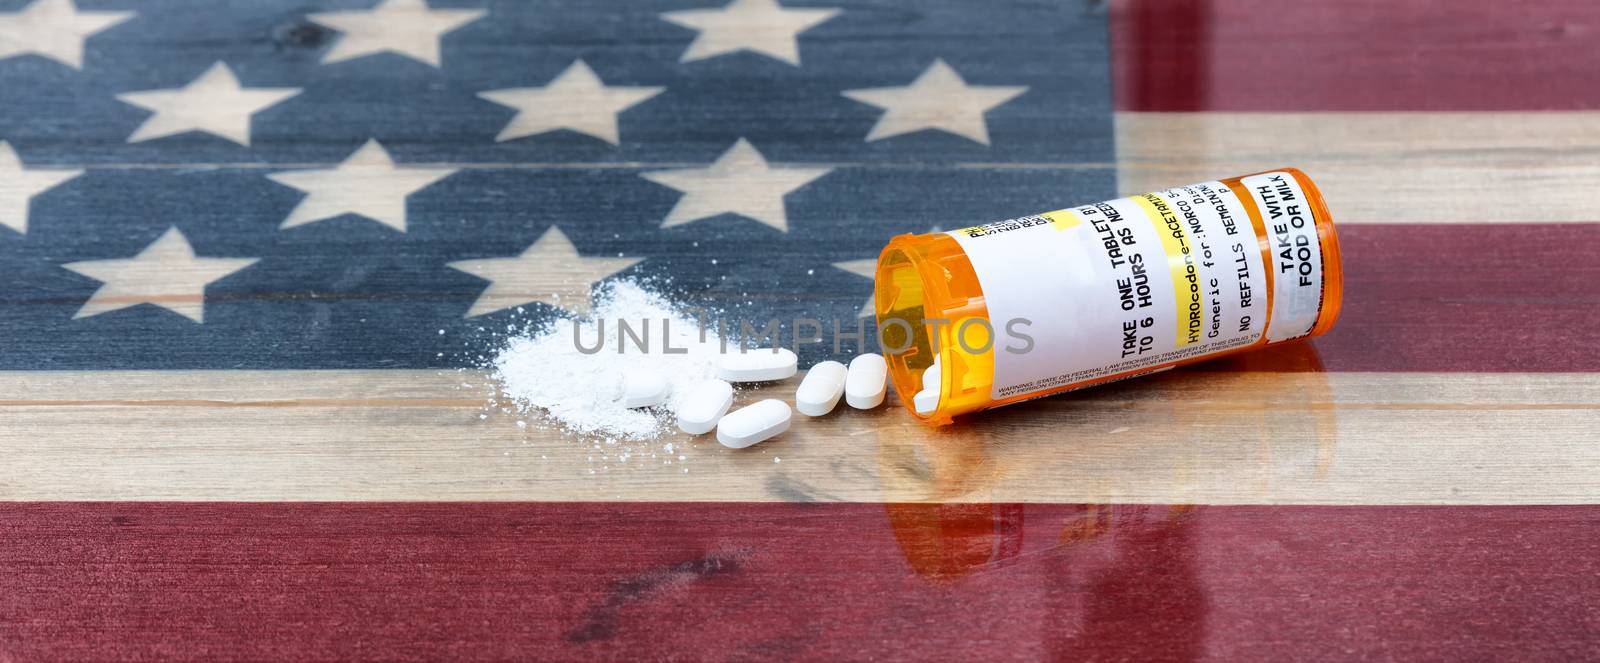 Open prescription bottle of crushed and whole opioid pain killer by tab1962